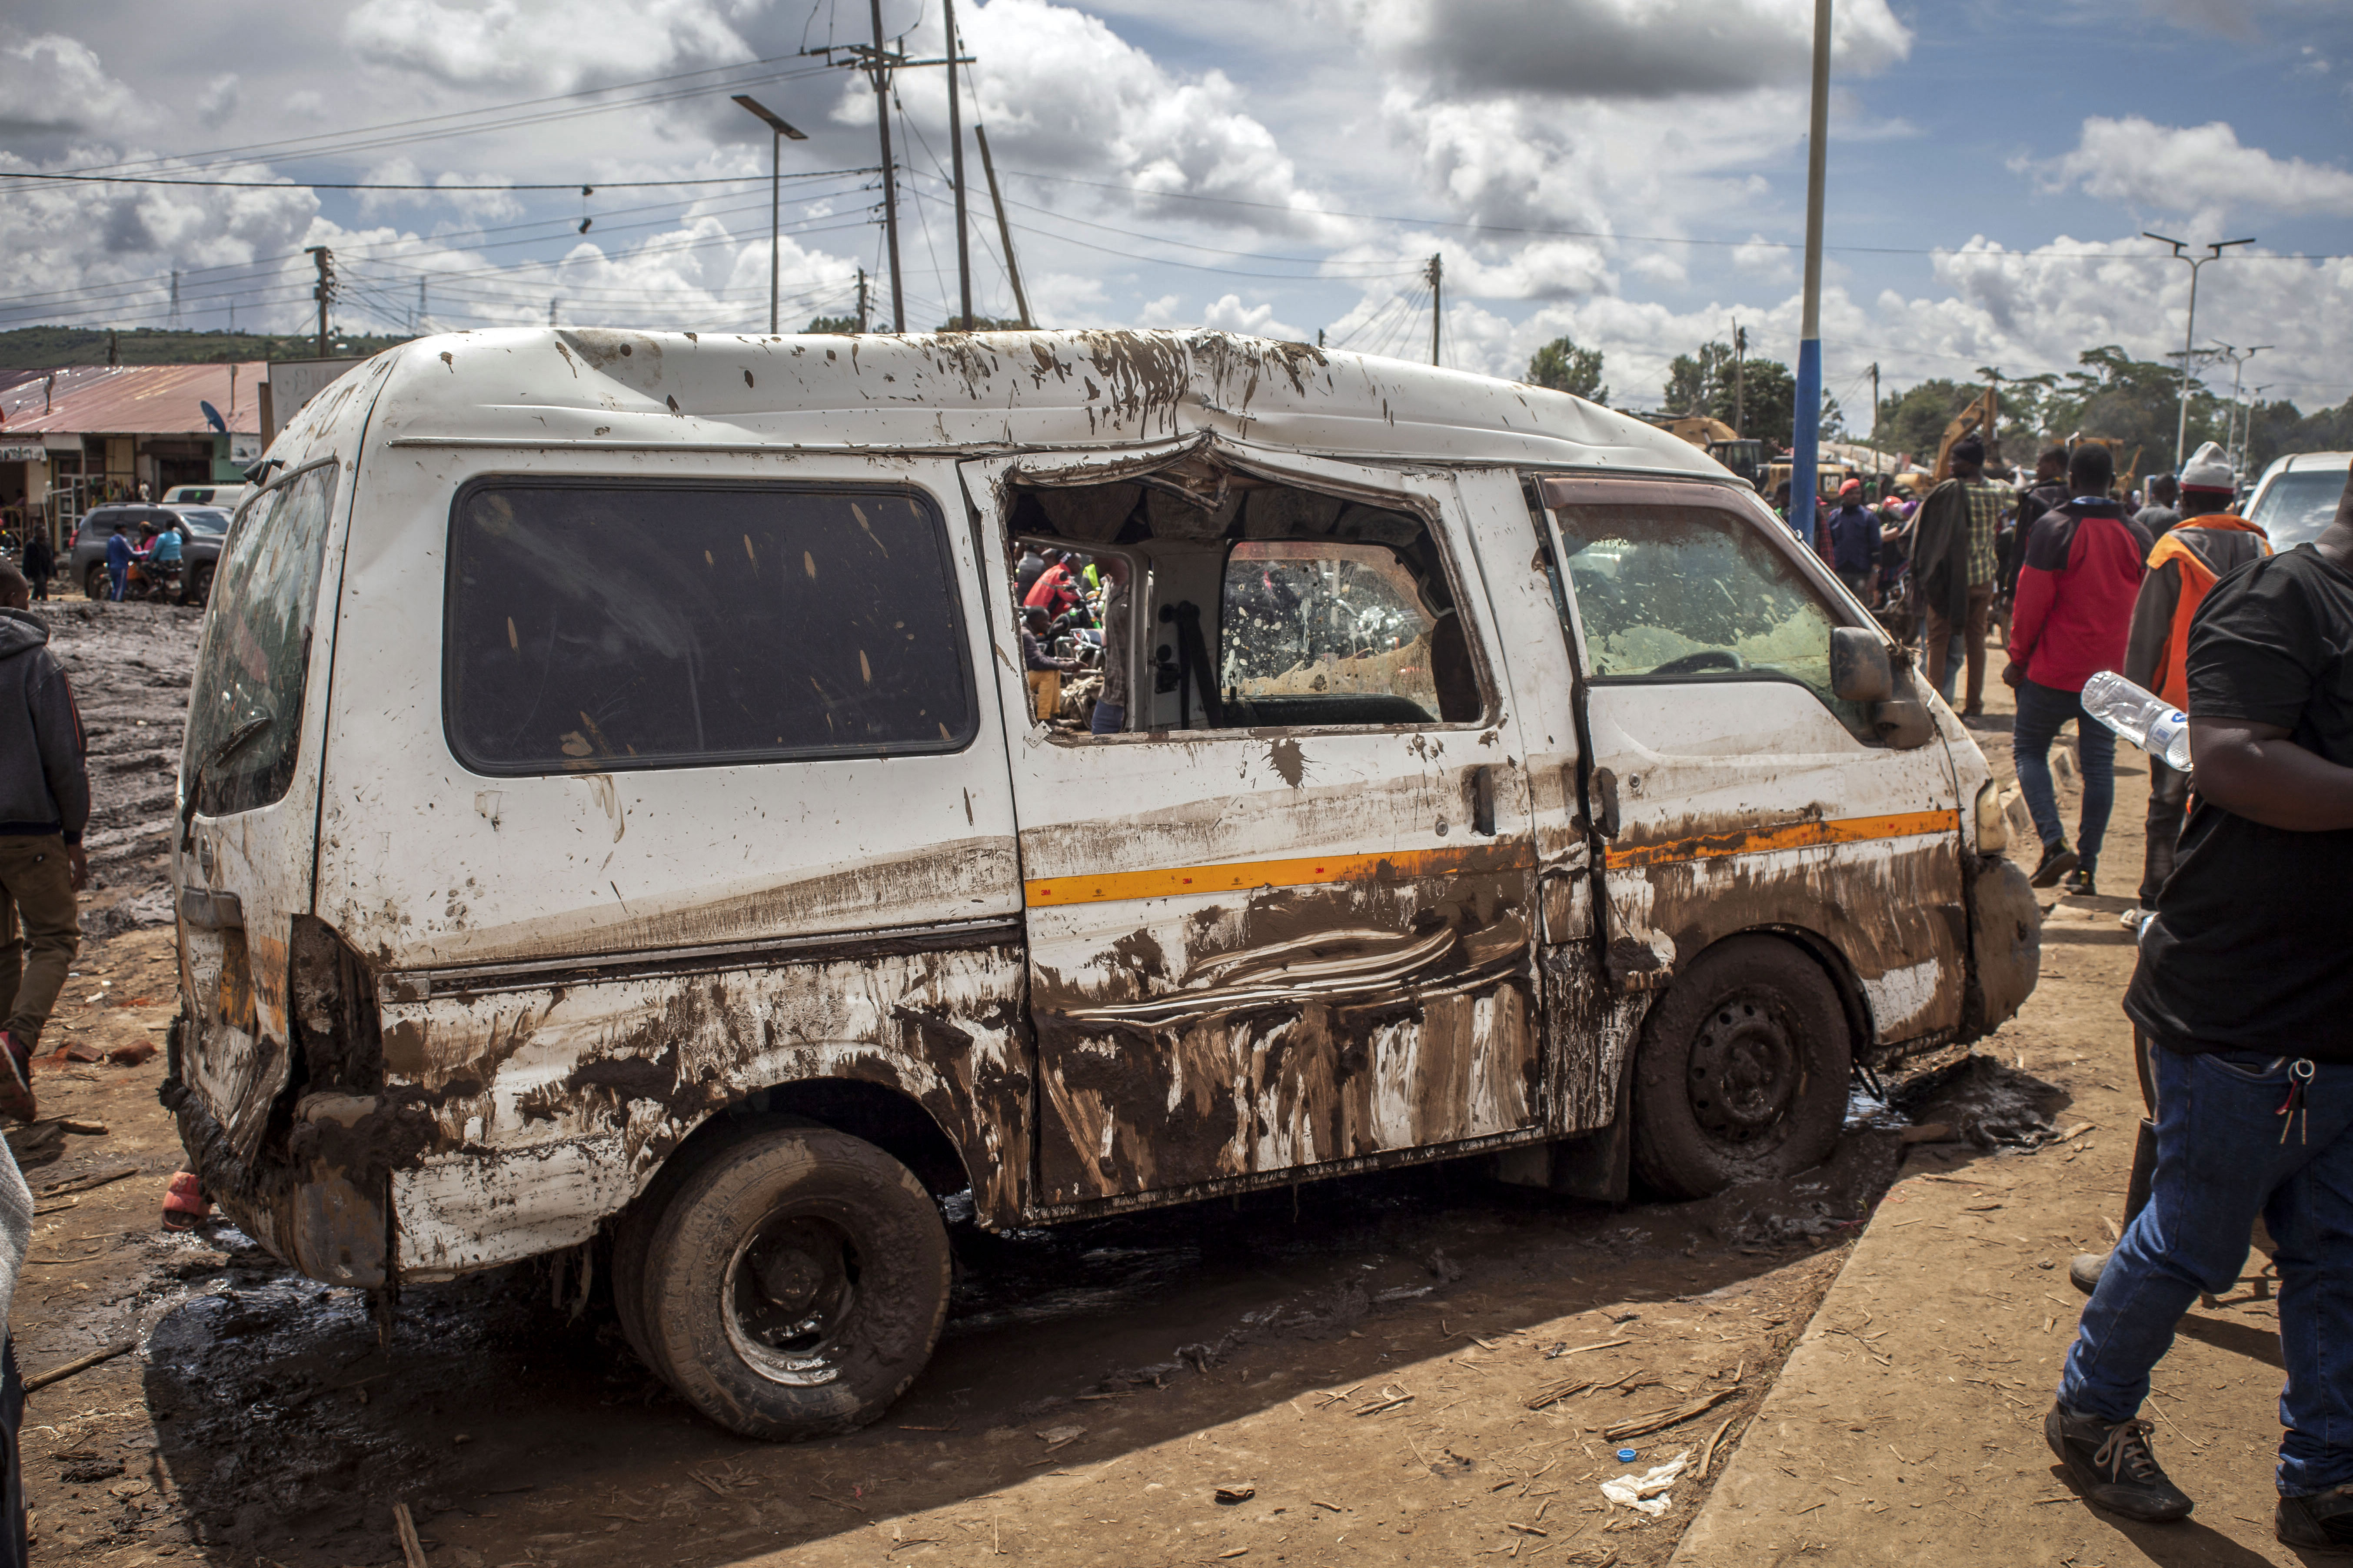 A damaged van is seen on a street following landslides and flooding triggered by heavy rainfall in Katesh, Tanzania.